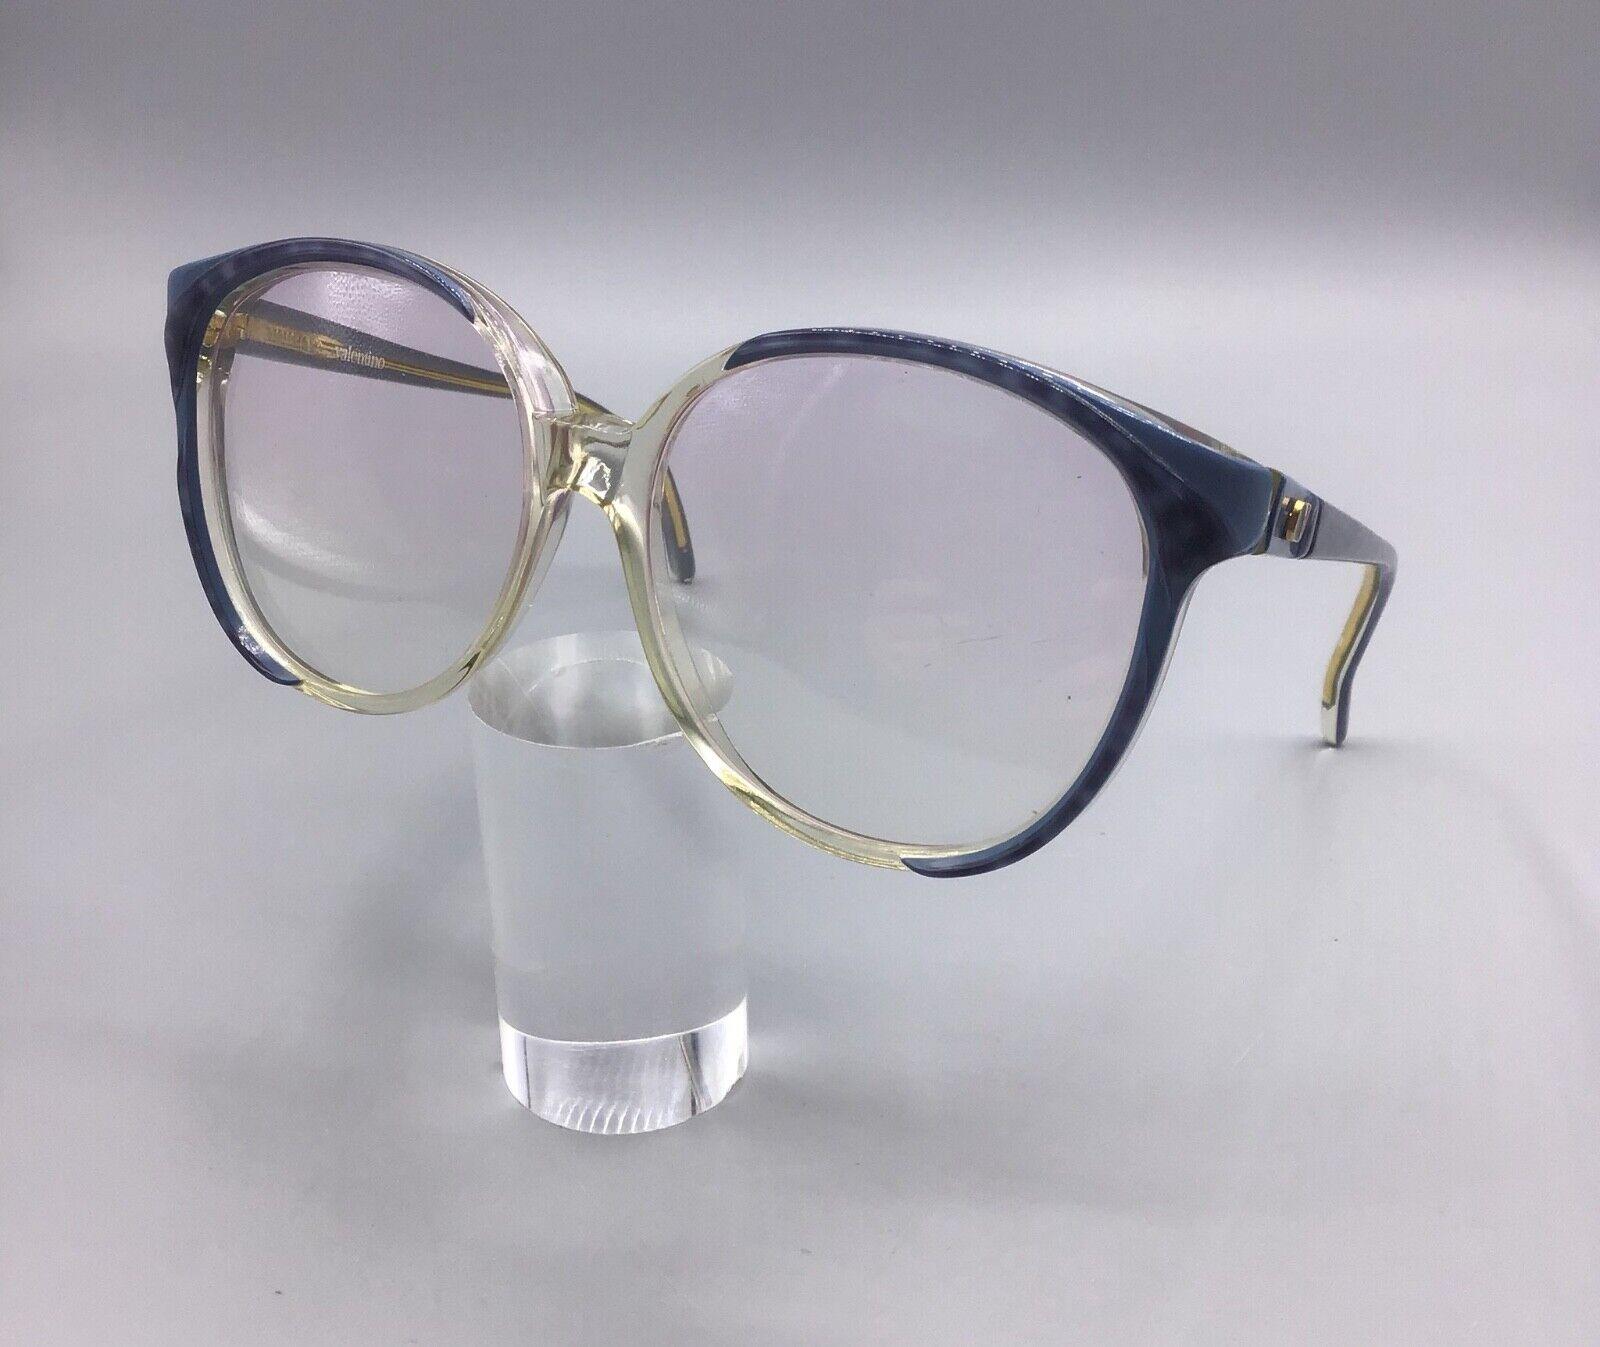 Valentino occhiale vintage 116 C7 Made in Italy brillen lunettes